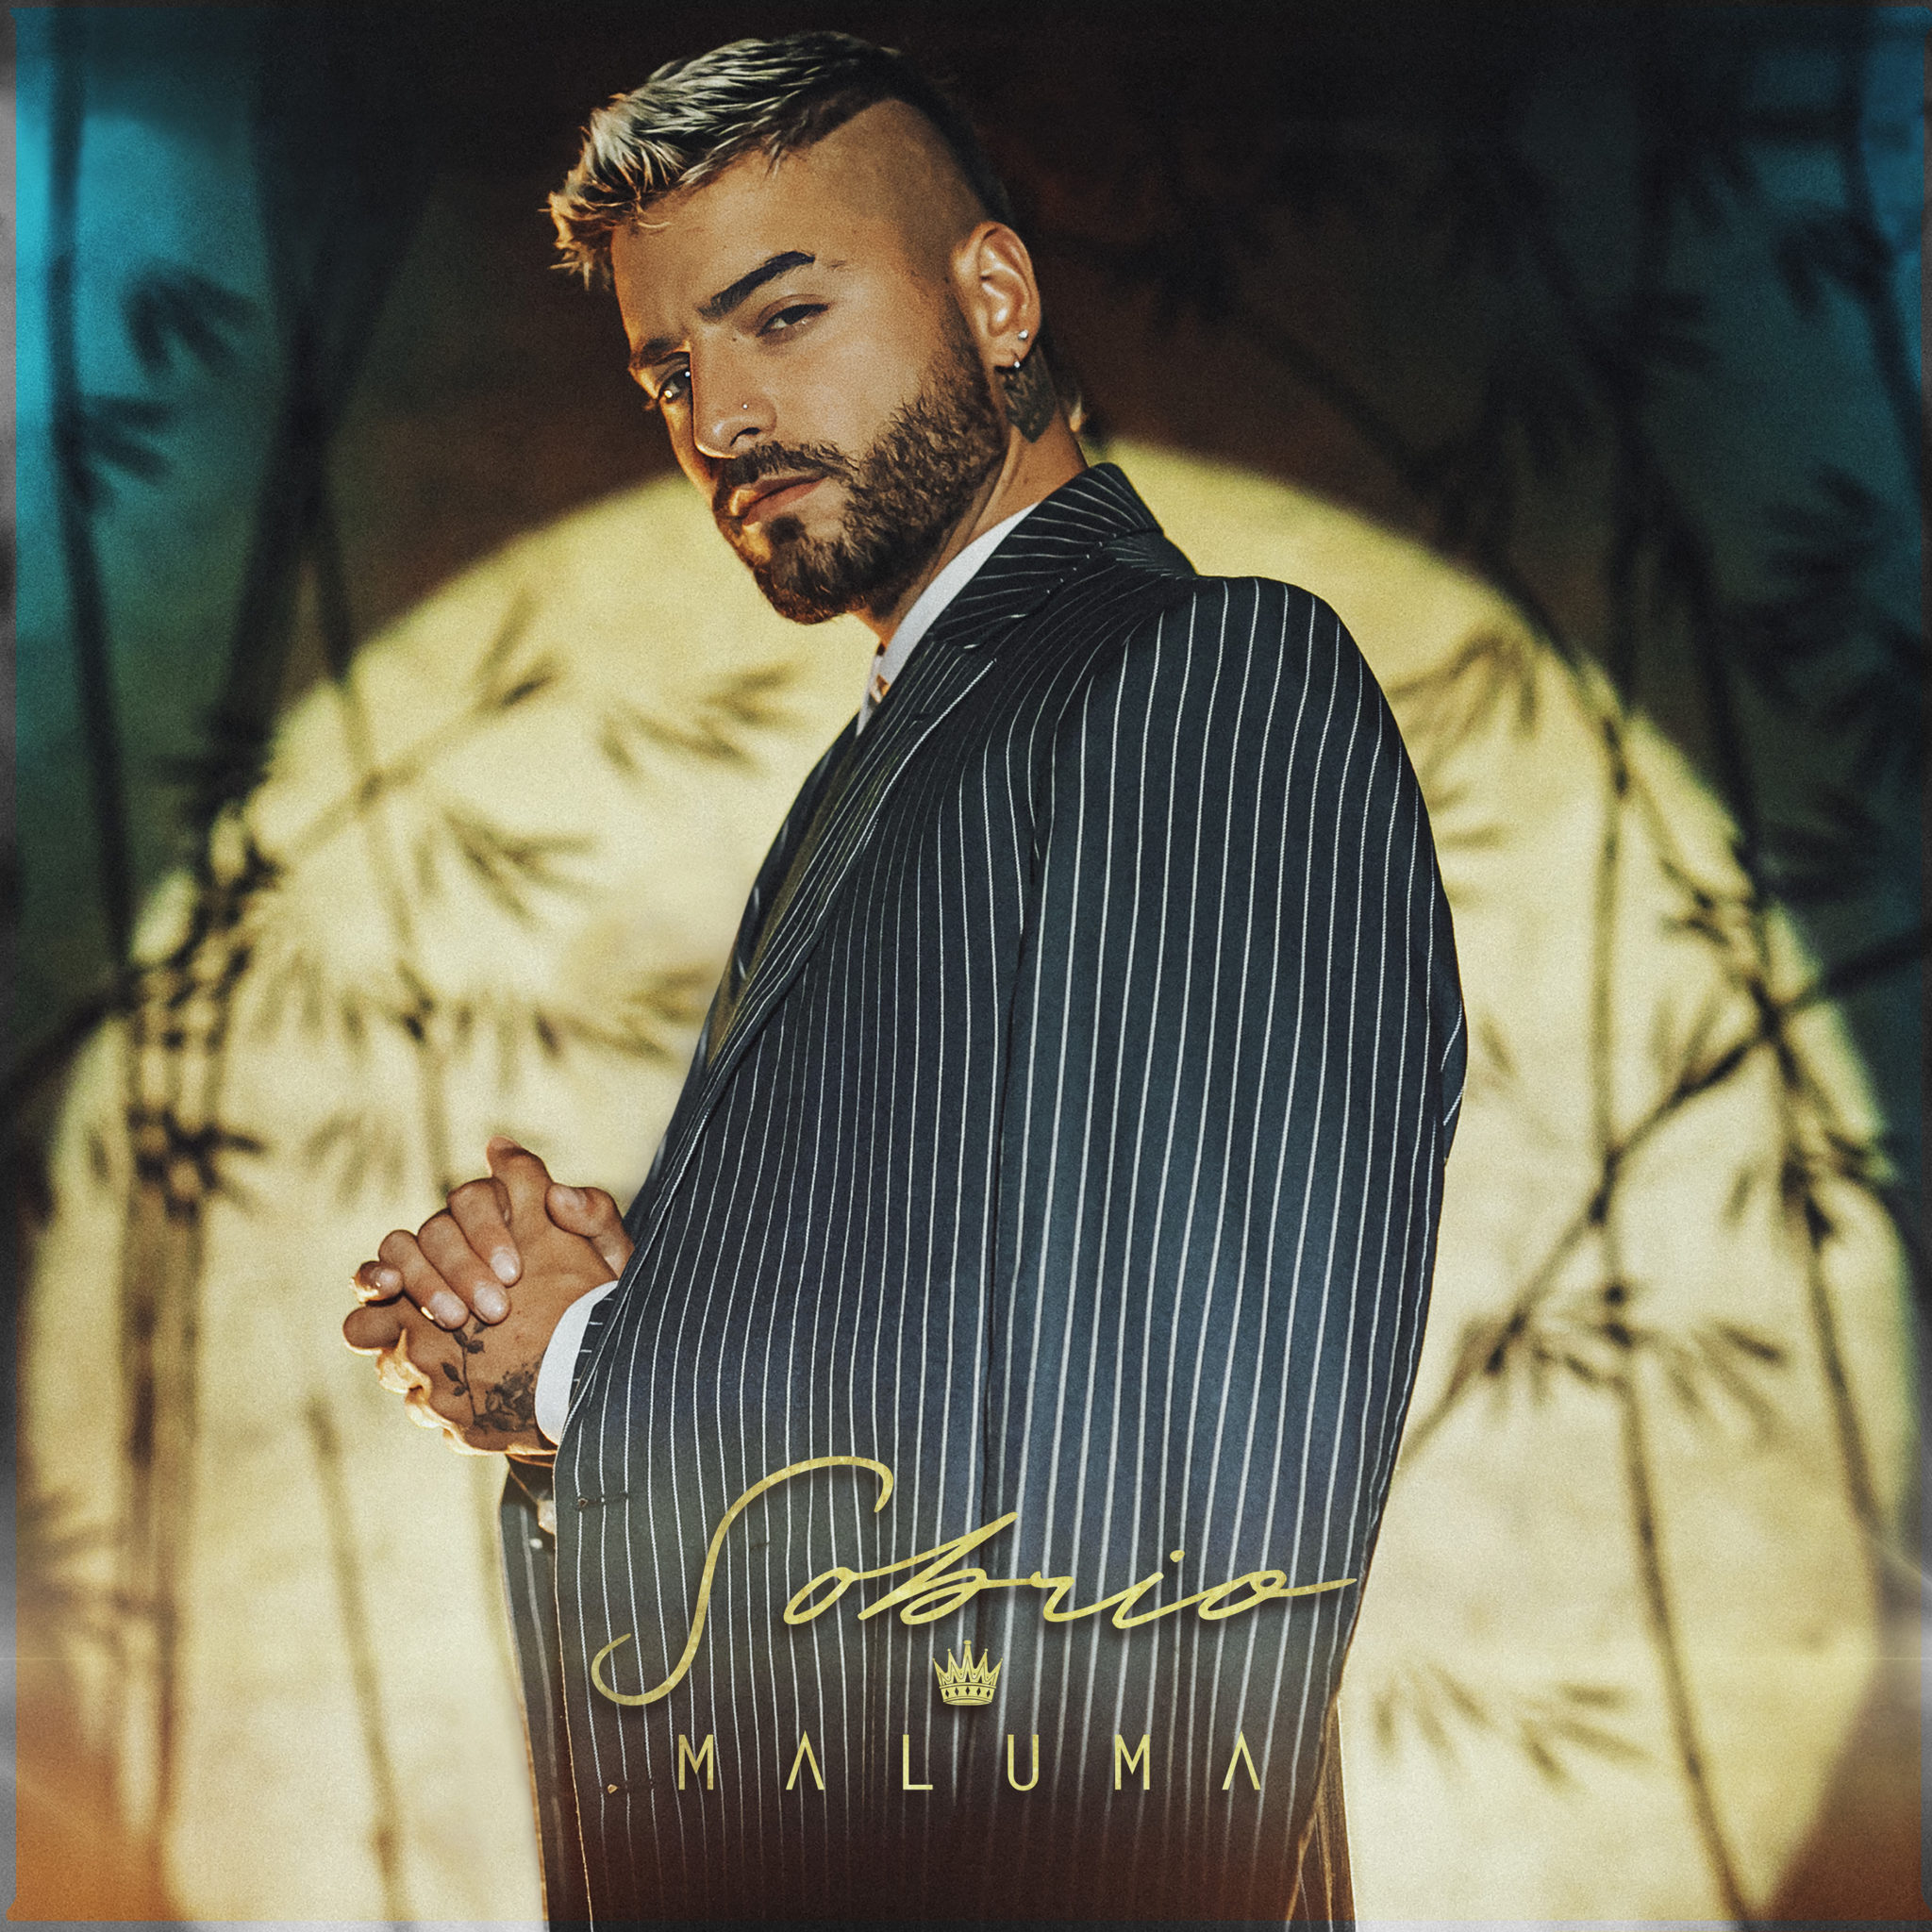 MALUMA RELEASES NEW SINGLE AND VIDEO “SOBRIO” AVAILABLE NOW! Walter